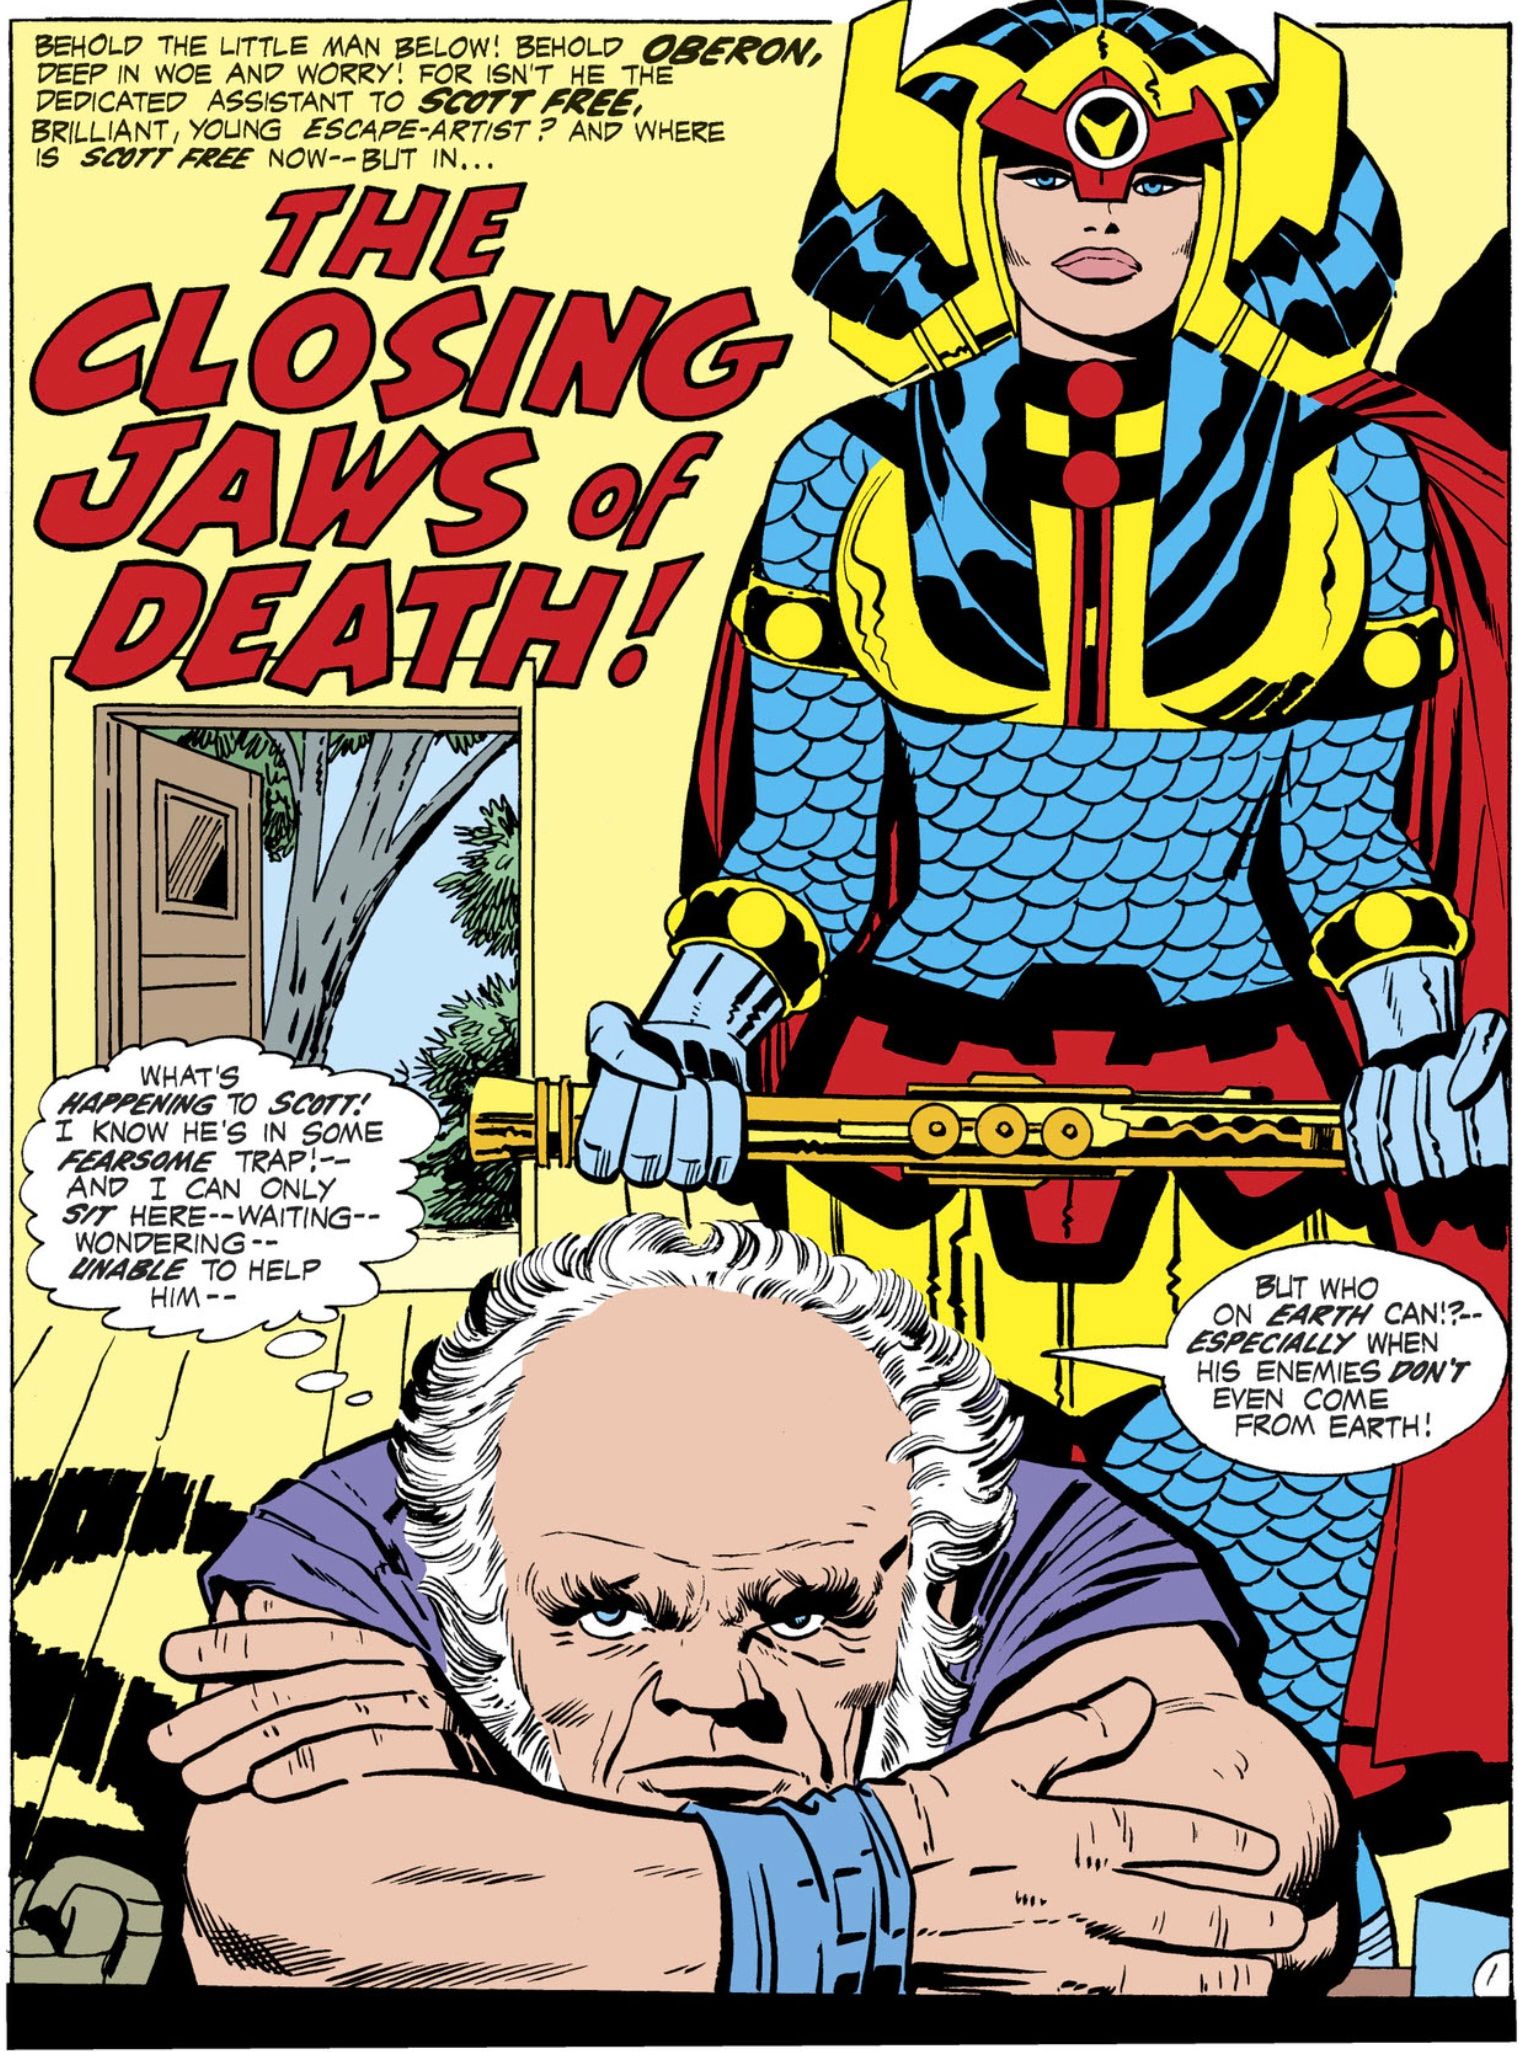 Comic book panel: Big Barda looms over Oberon in her first appearance.